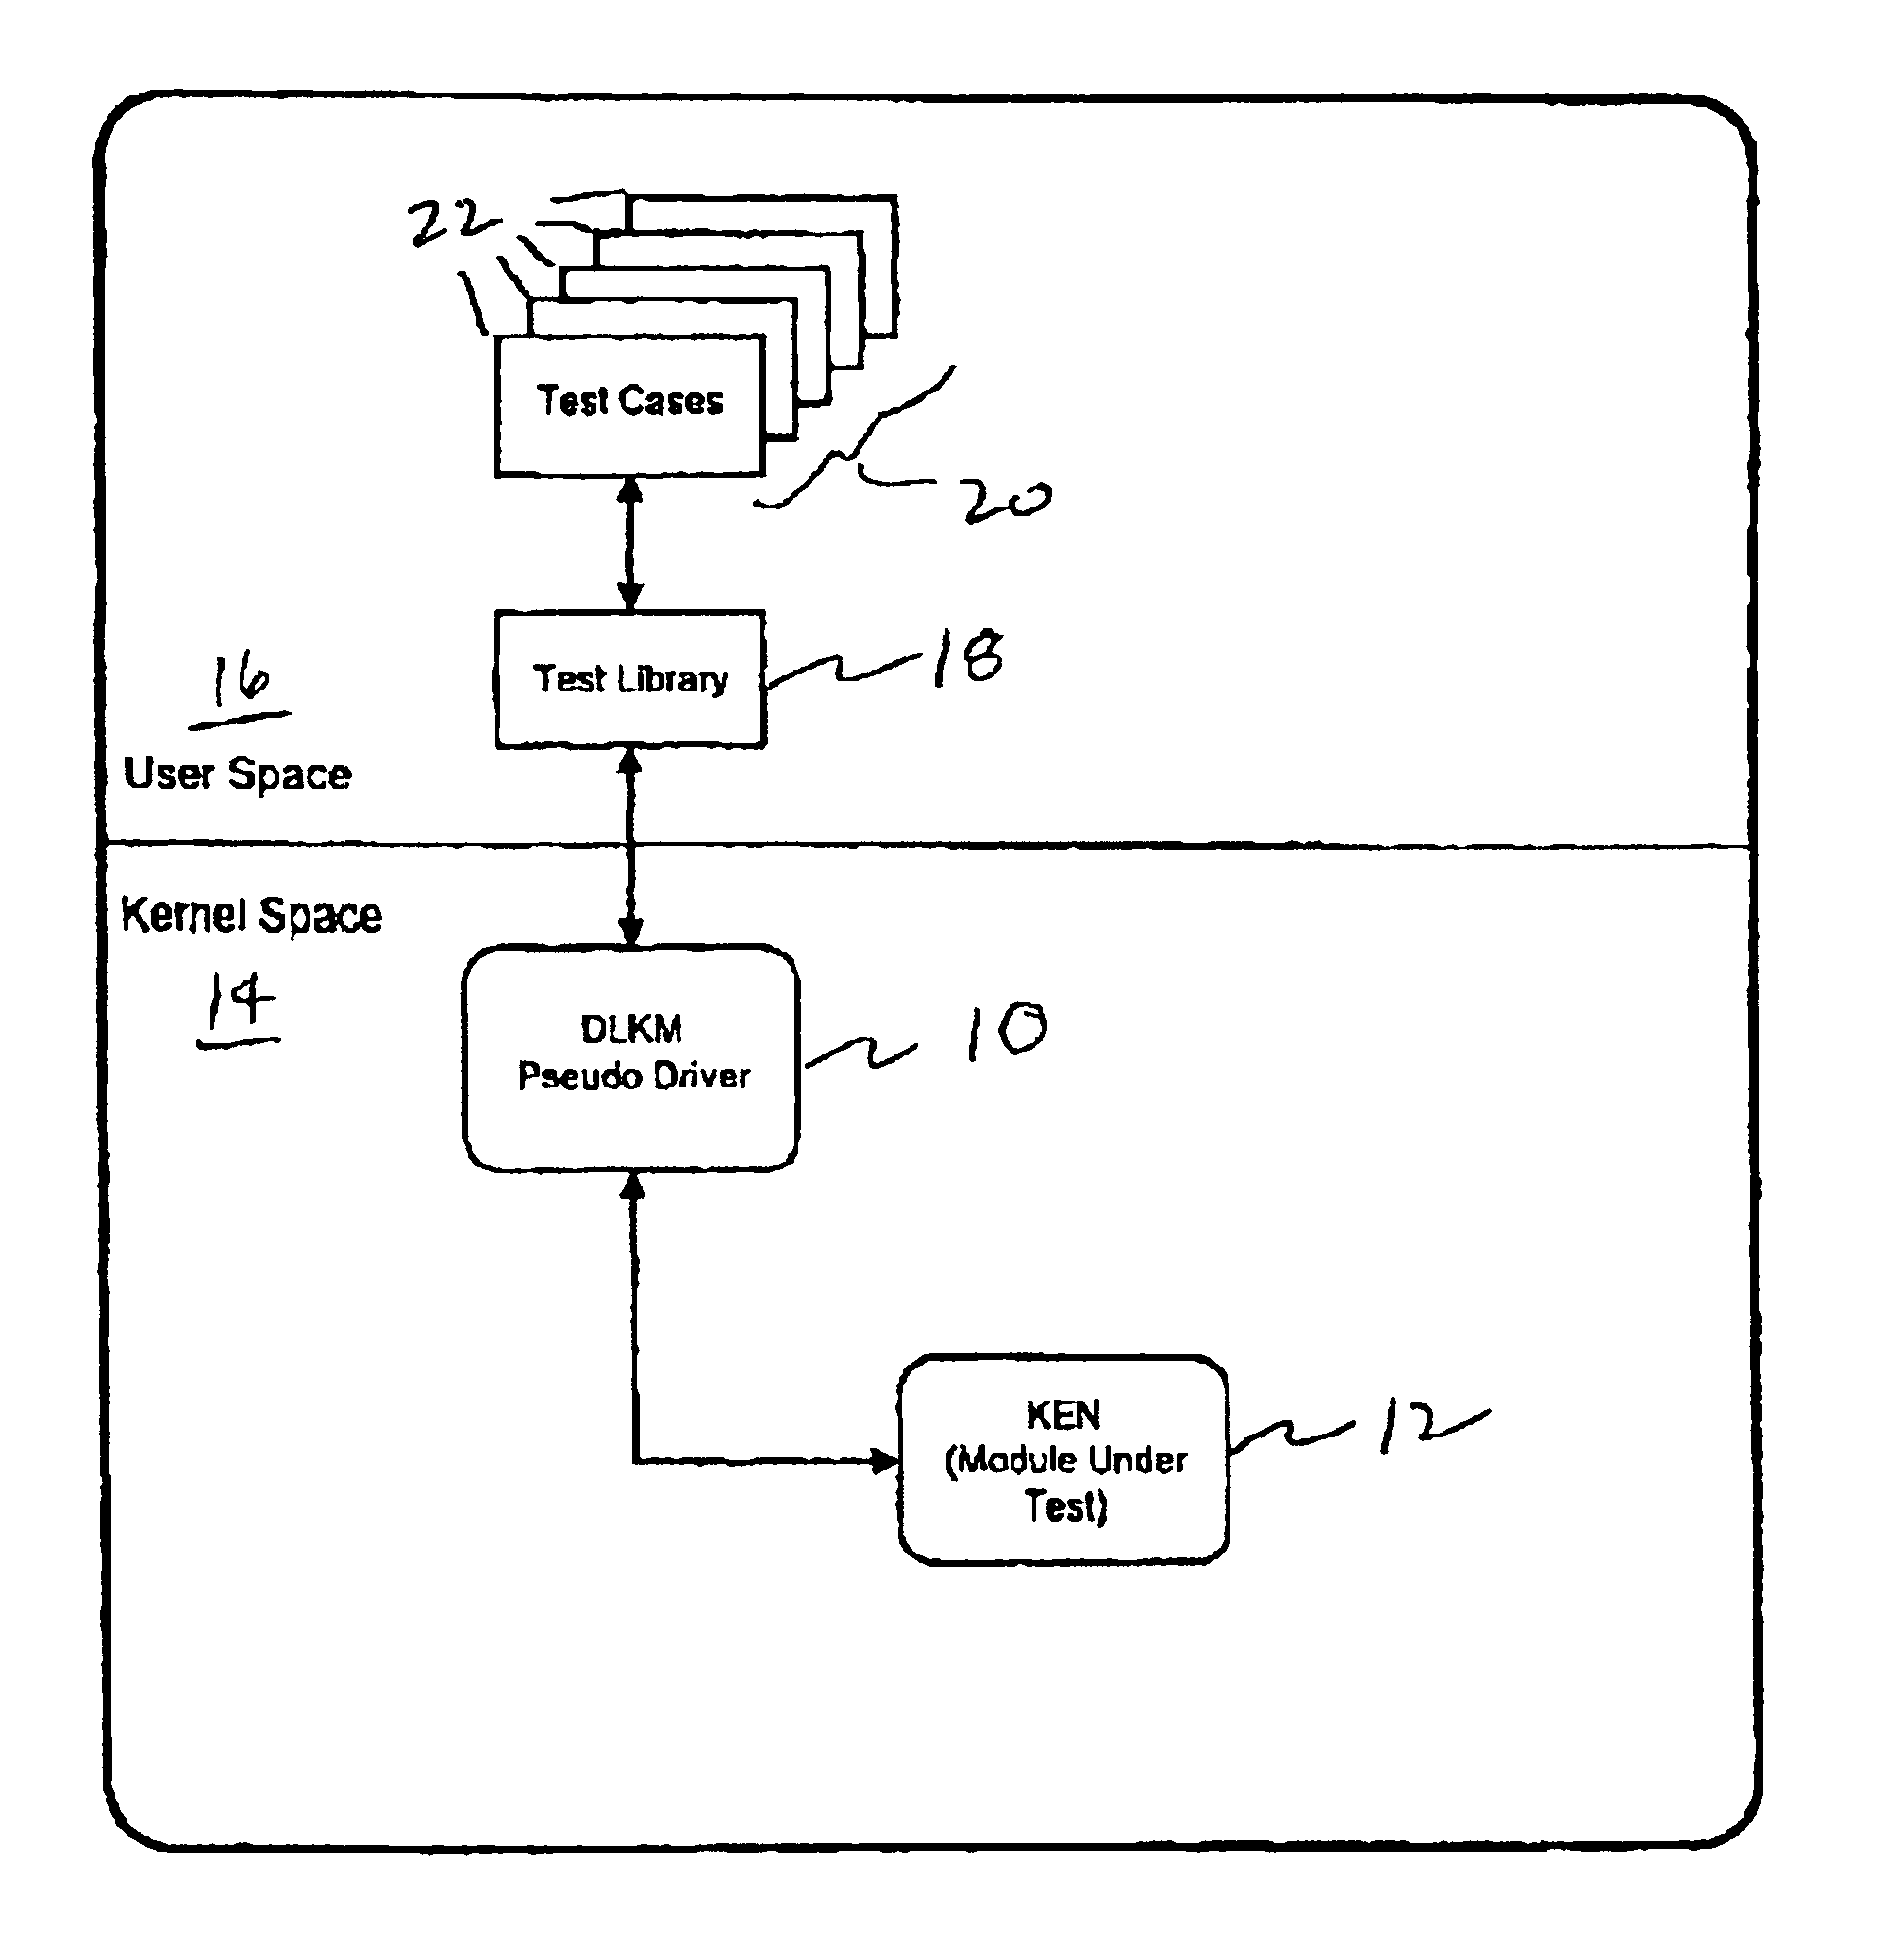 Method and apparatus for kernel module testing